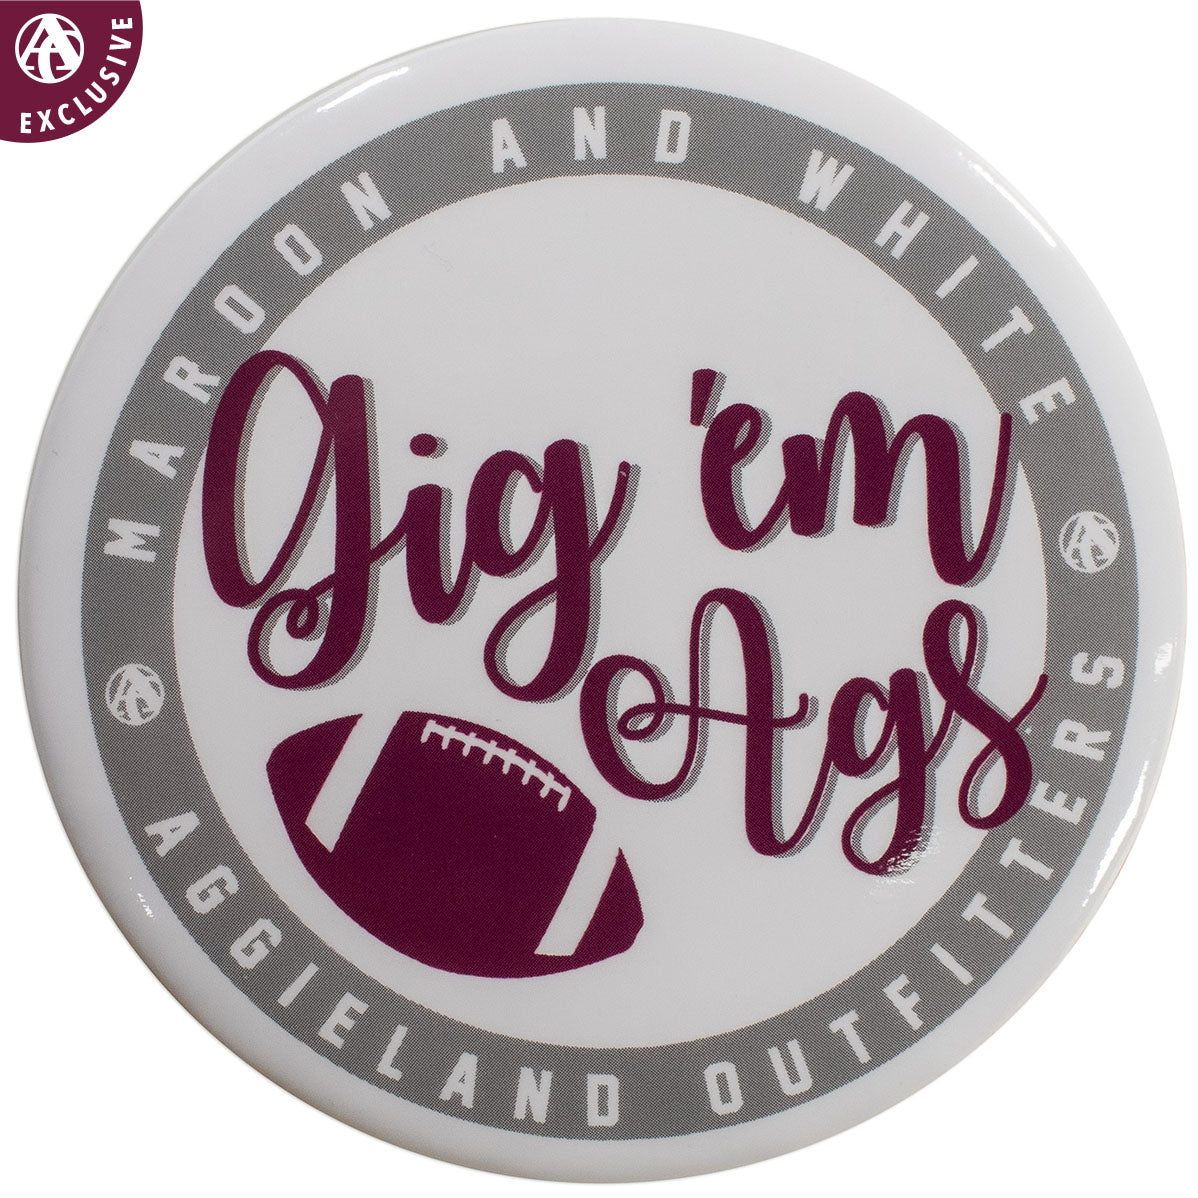 Gig 'Em Aggies Football Player Button – Tailgated Co.